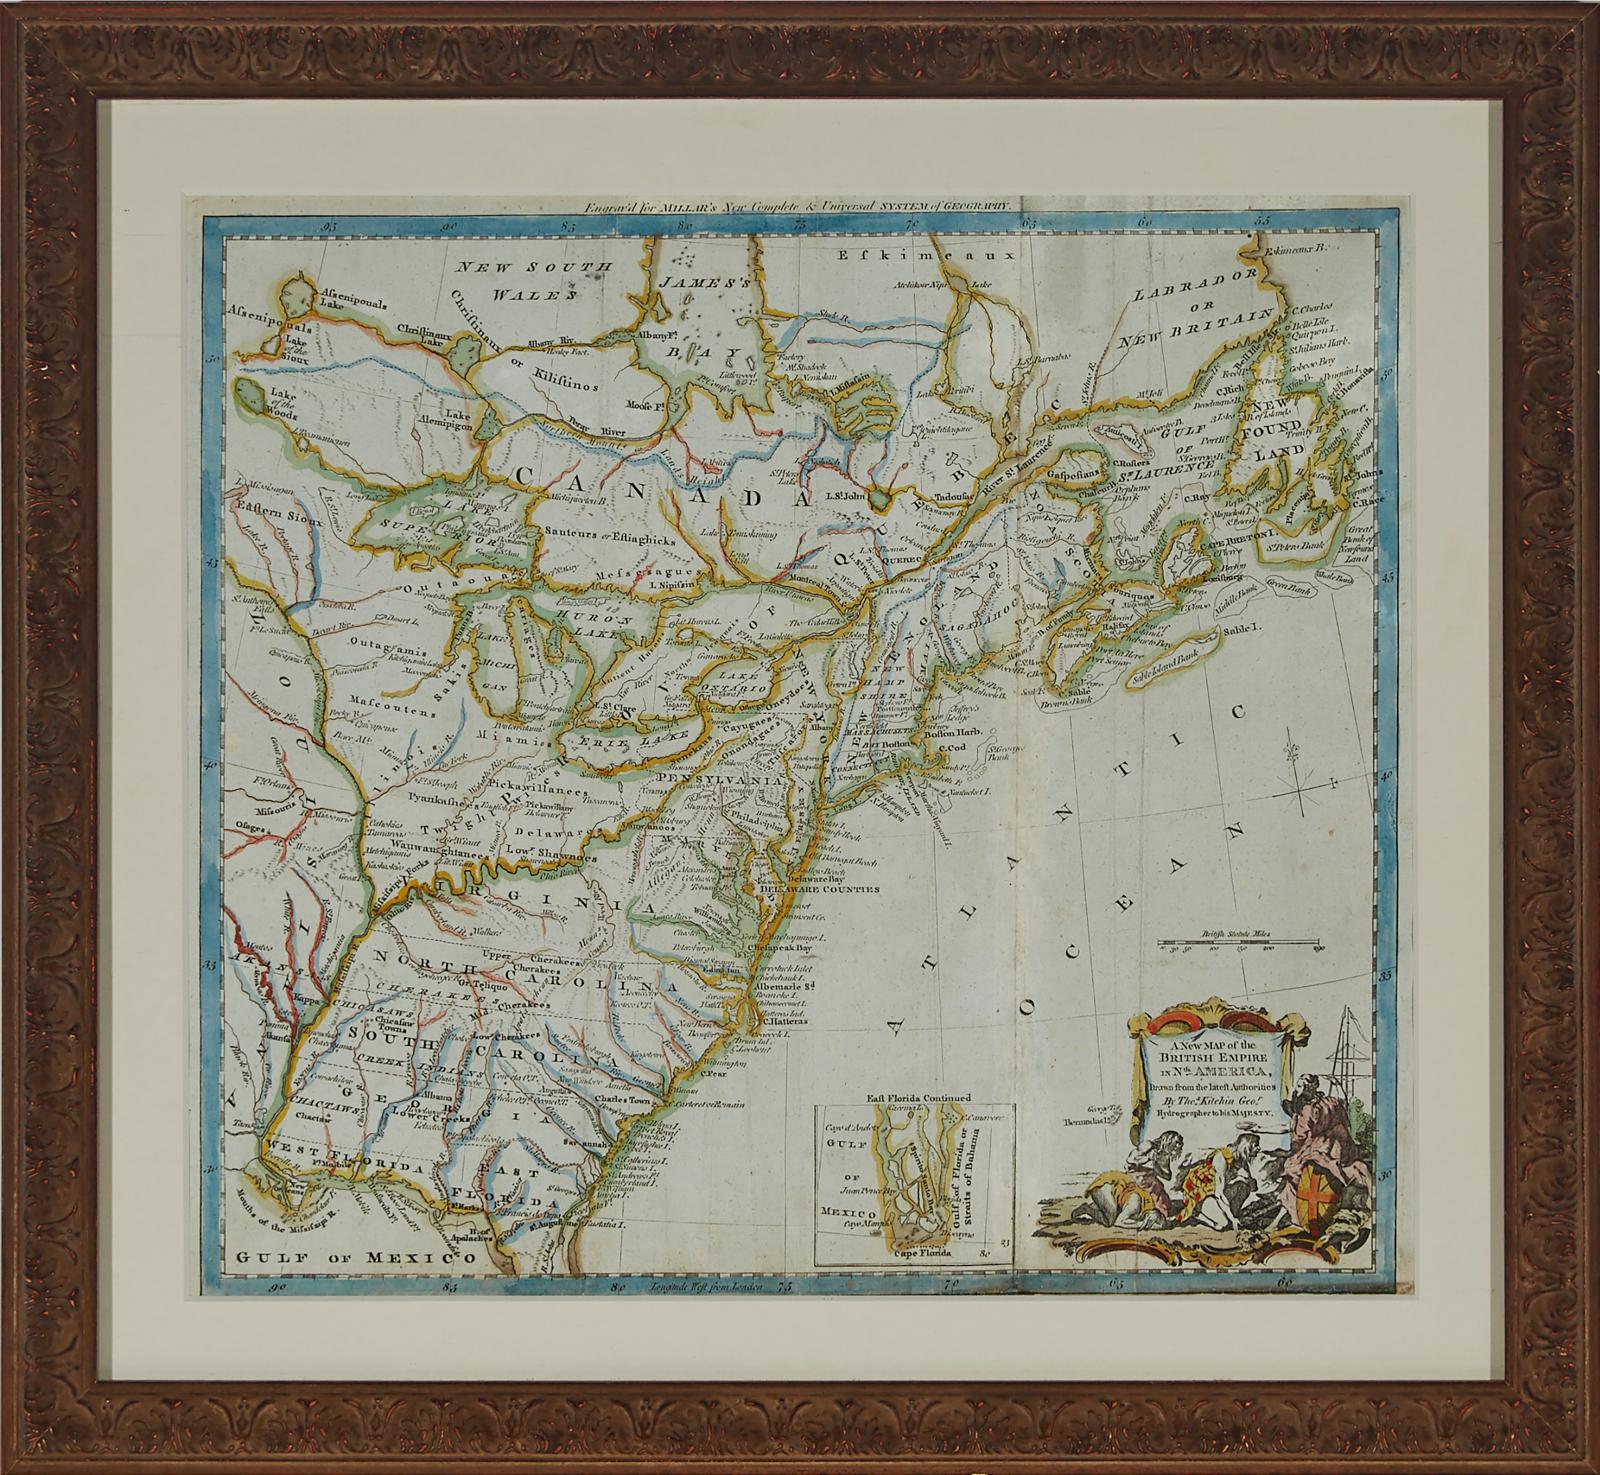 Thomas Kitchin (1718-1784) - A New Map Of The British Empire In North America